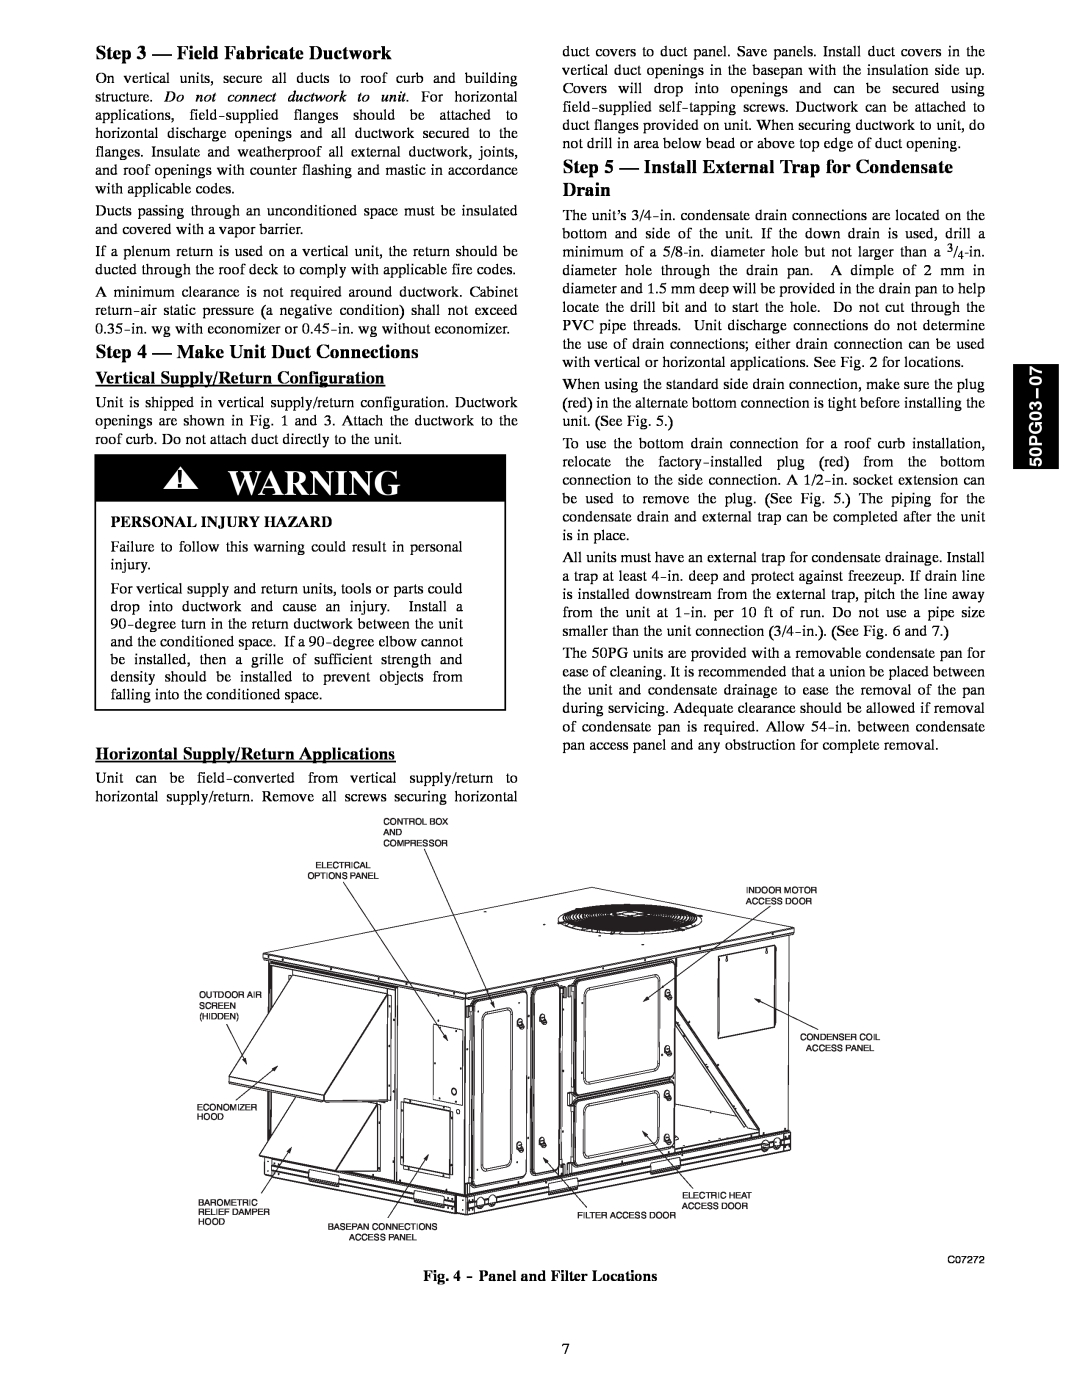 Carrier 50PG03-07 Field Fabricate Ductwork, Make Unit Duct Connections, Vertical Supply/Return Configuration, 50PG03--07 